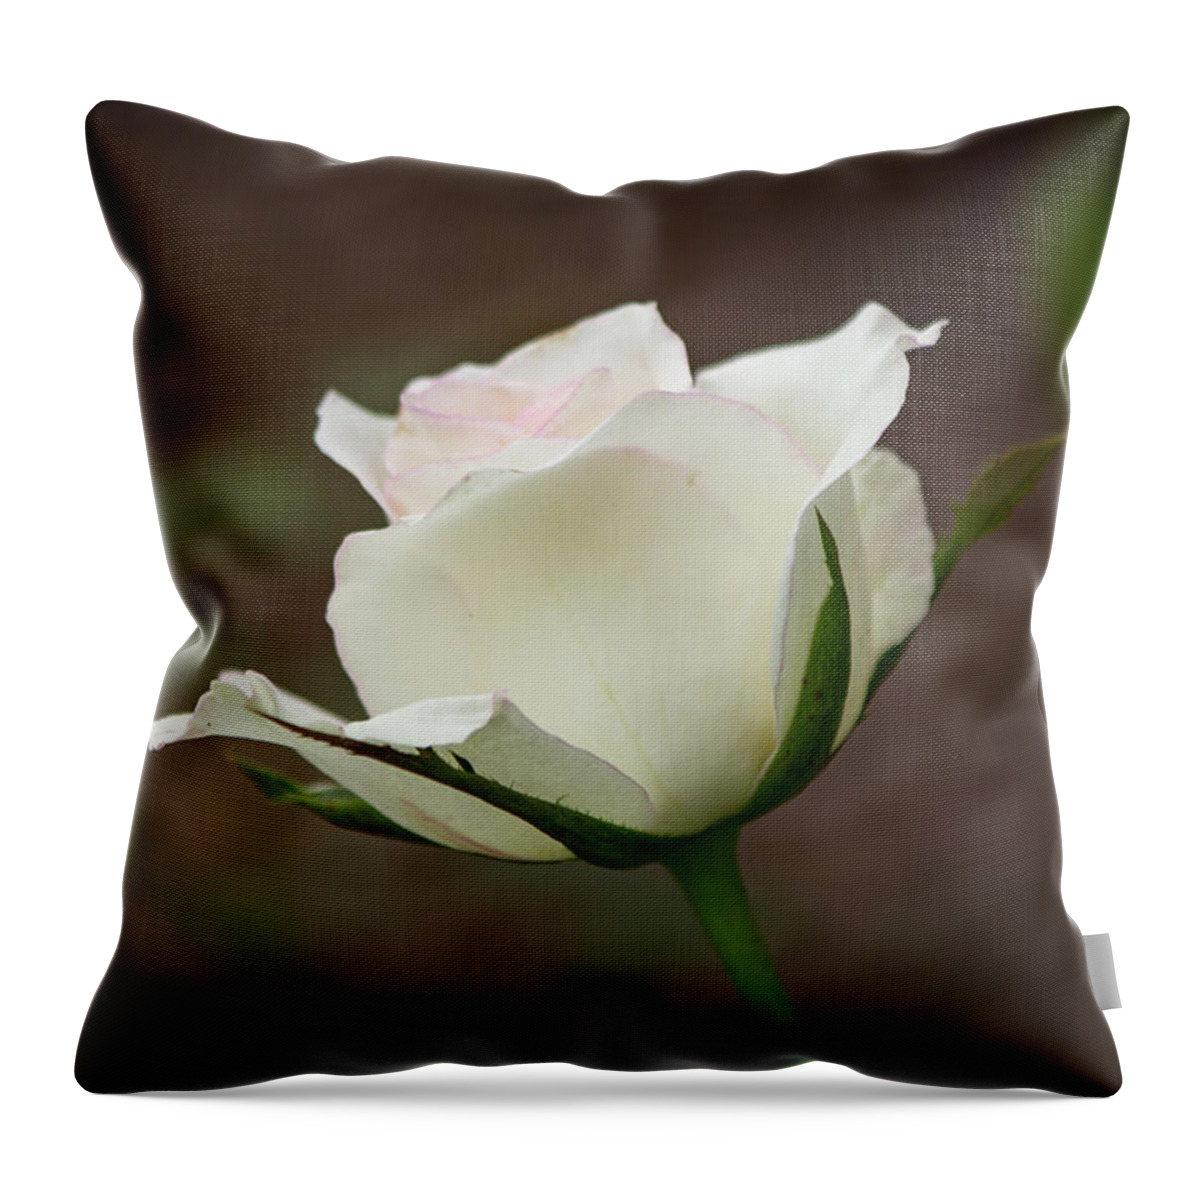 Florida Throw Pillow featuring the photograph White Rose Bud 2 by Teresa Wilson